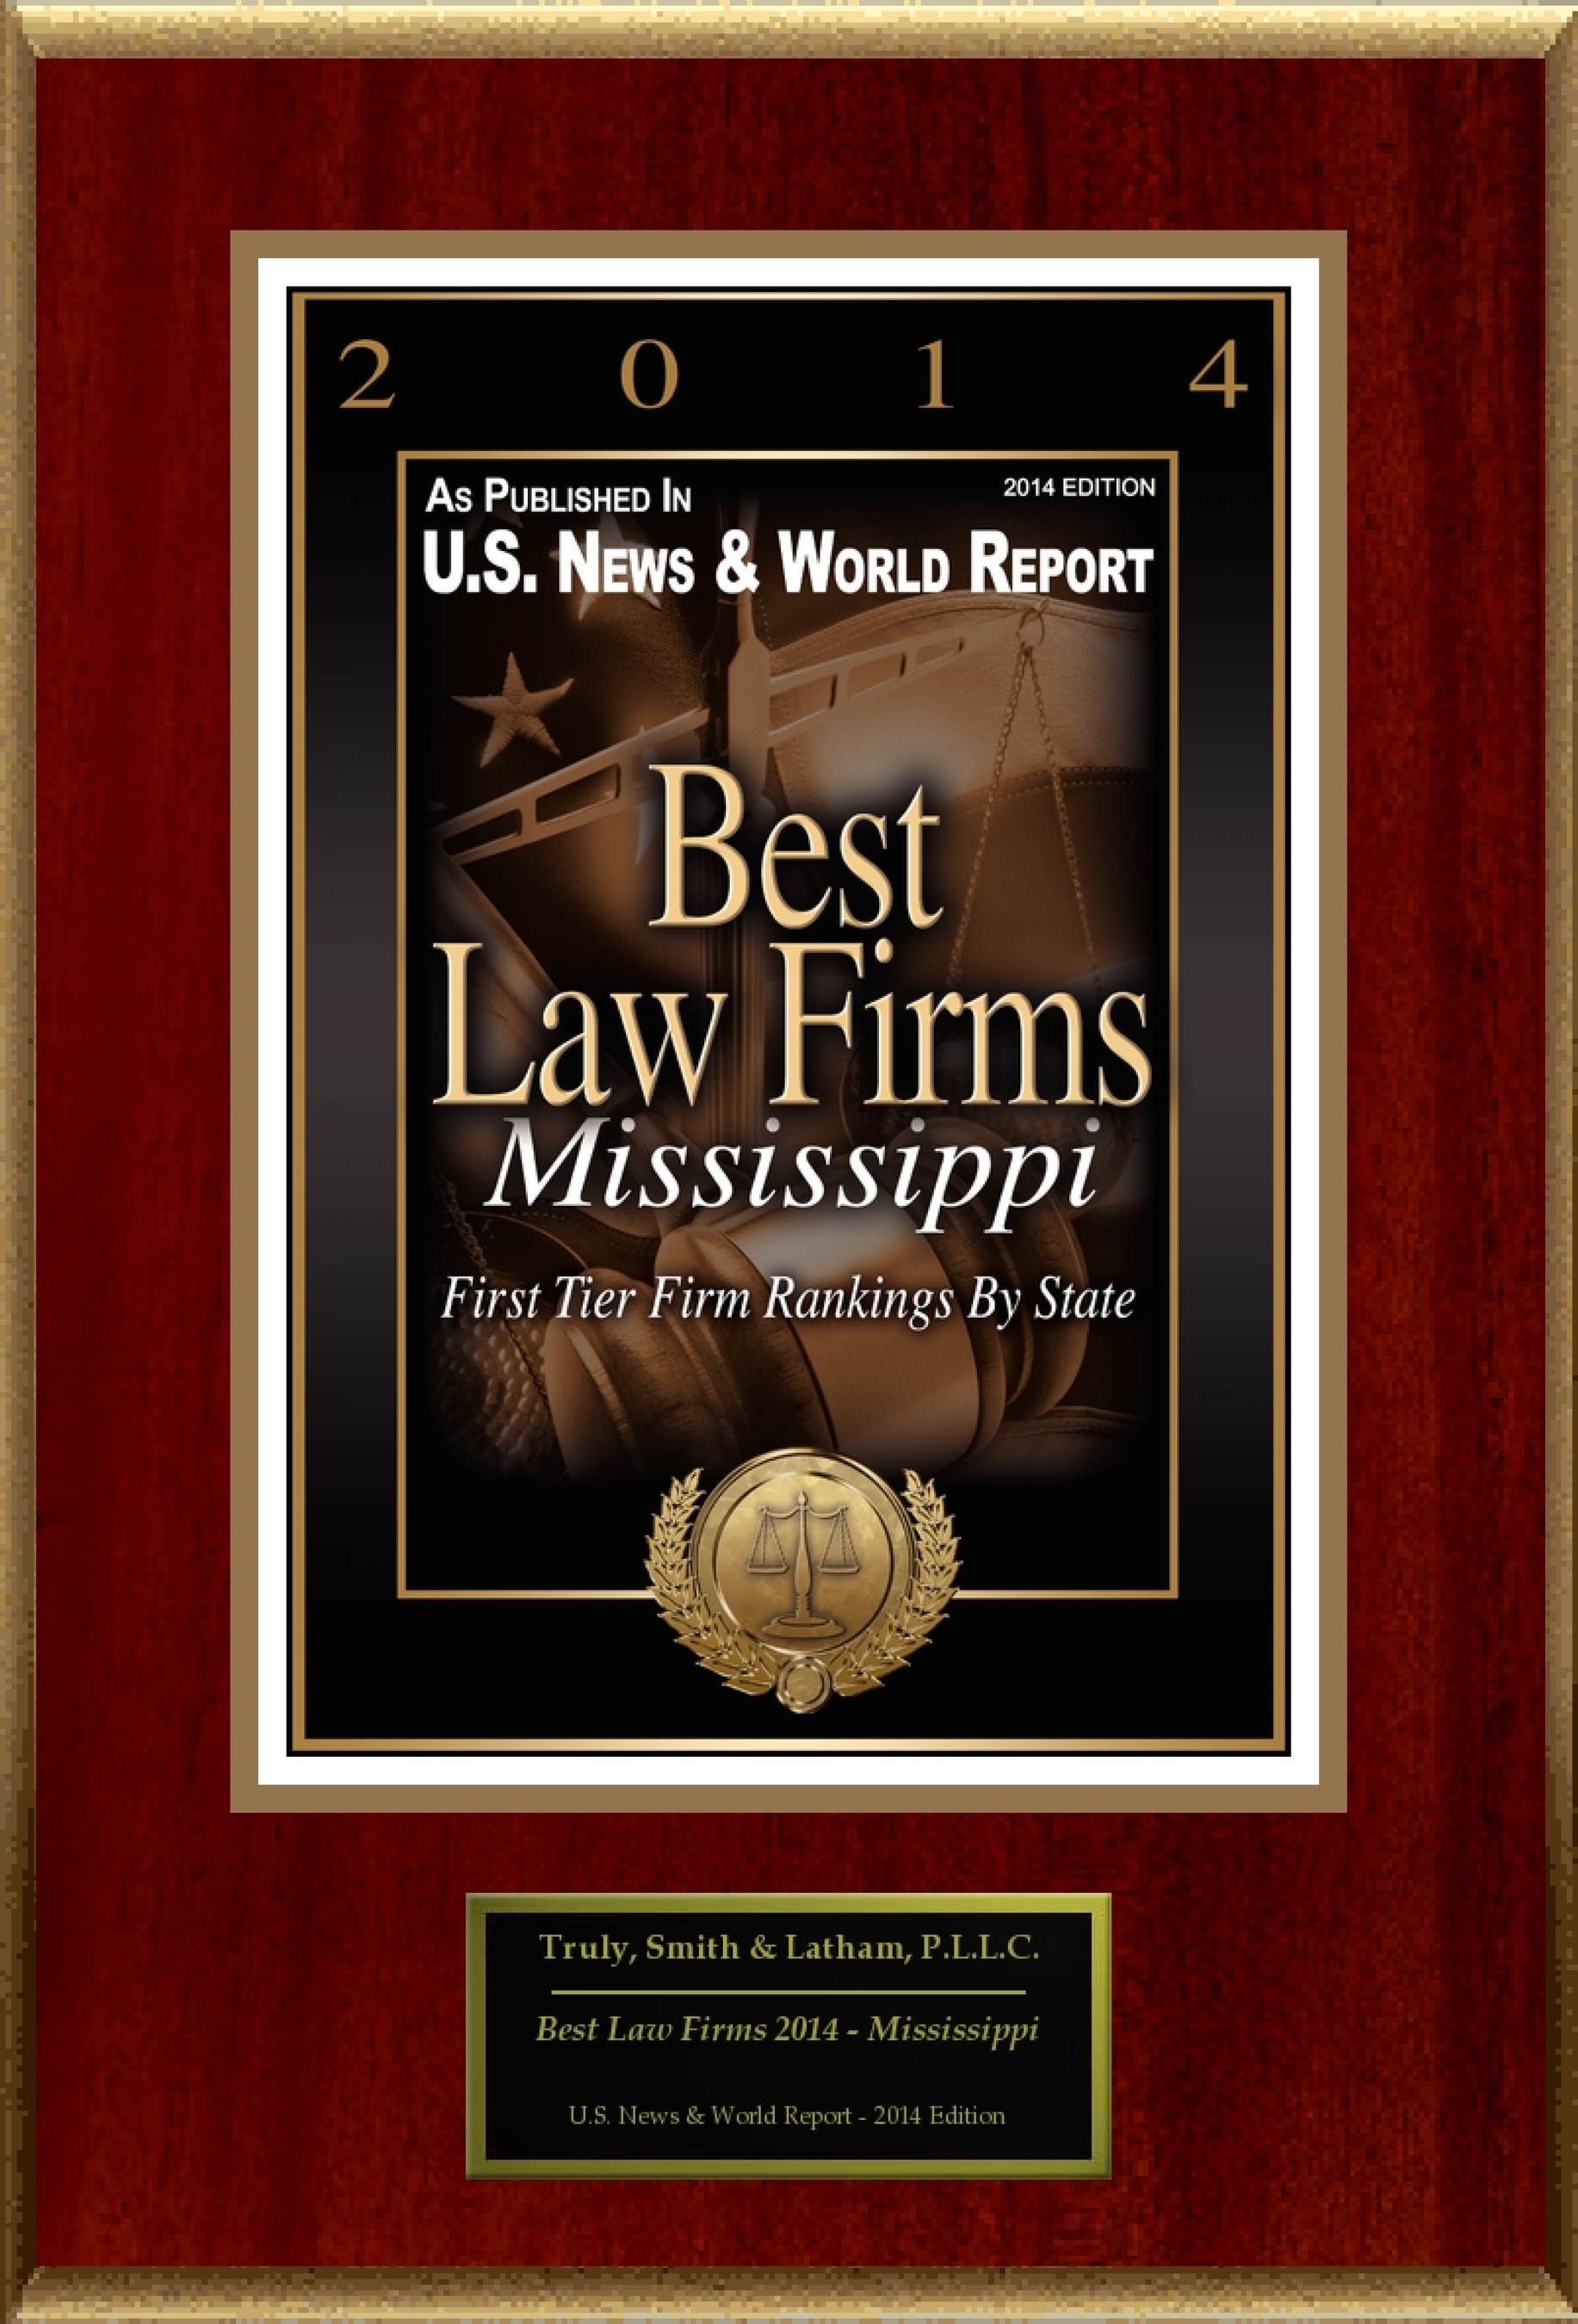 Truly, Smith & Latham, P.L.L.C. Selected For "Best Law Firms 2014 - Mississippi" (PRNewsFoto/Truly, Smith & Latham, P.L.L.C.)